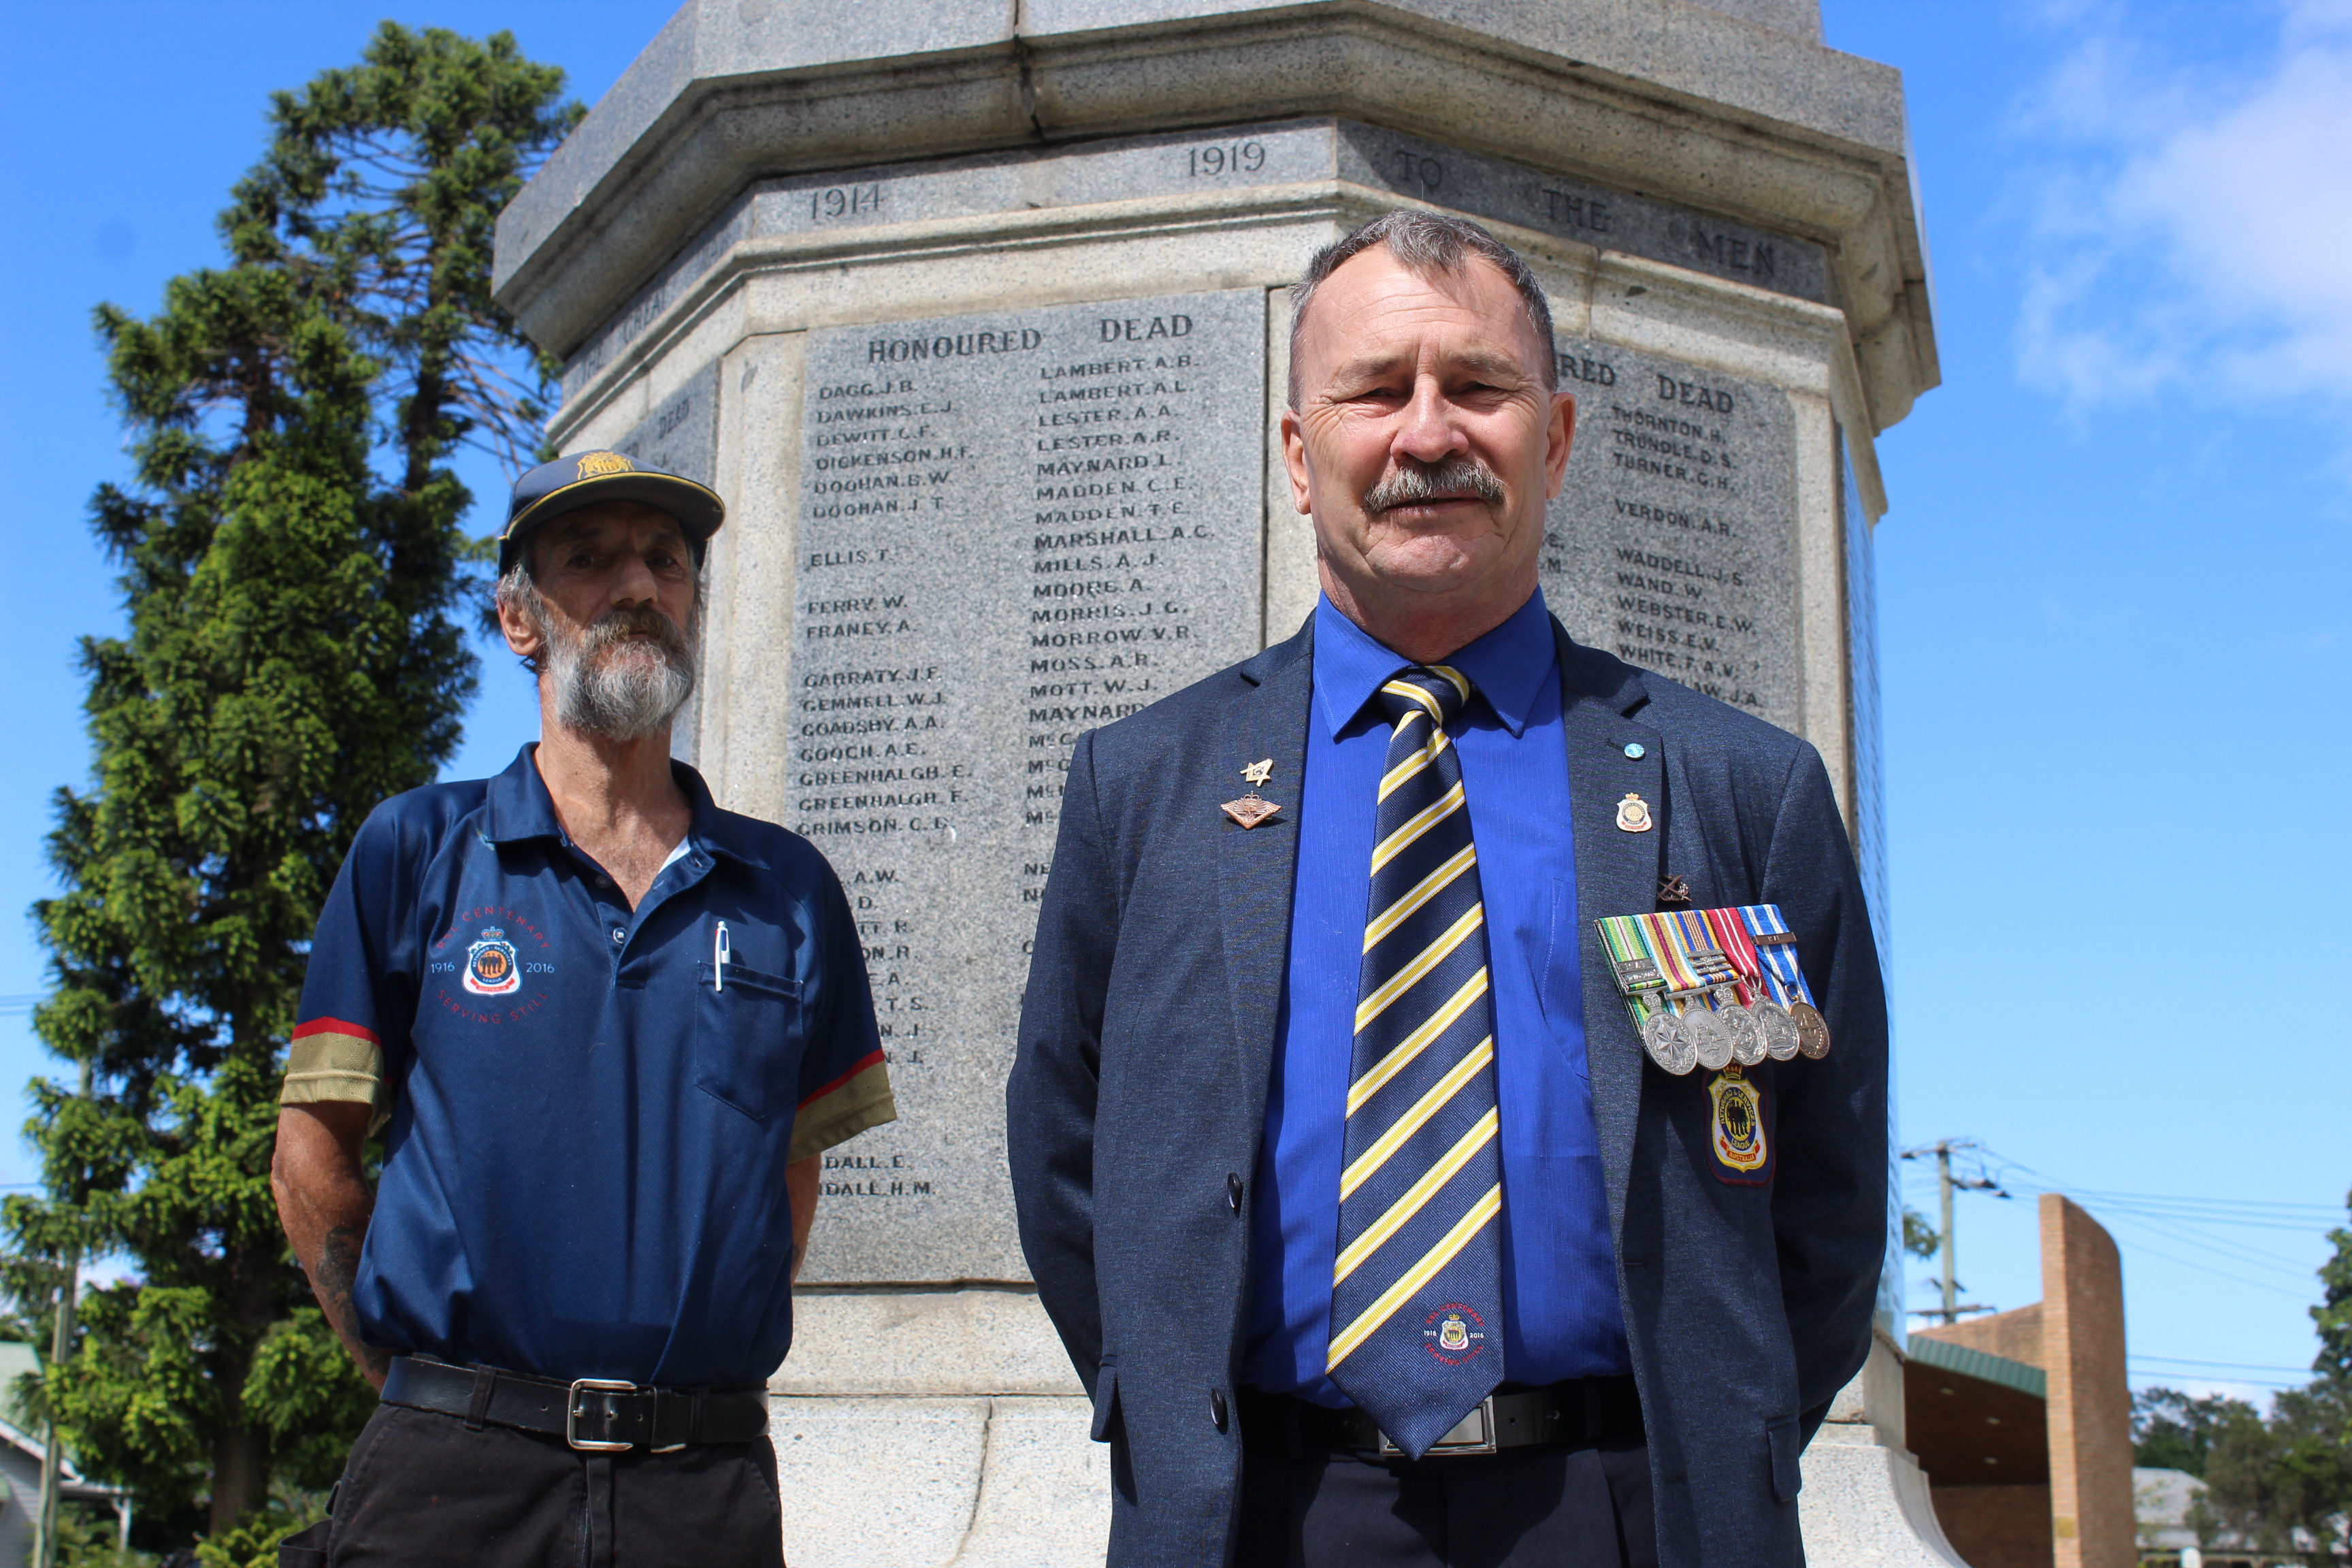 Crowd limit for Remembrance Day